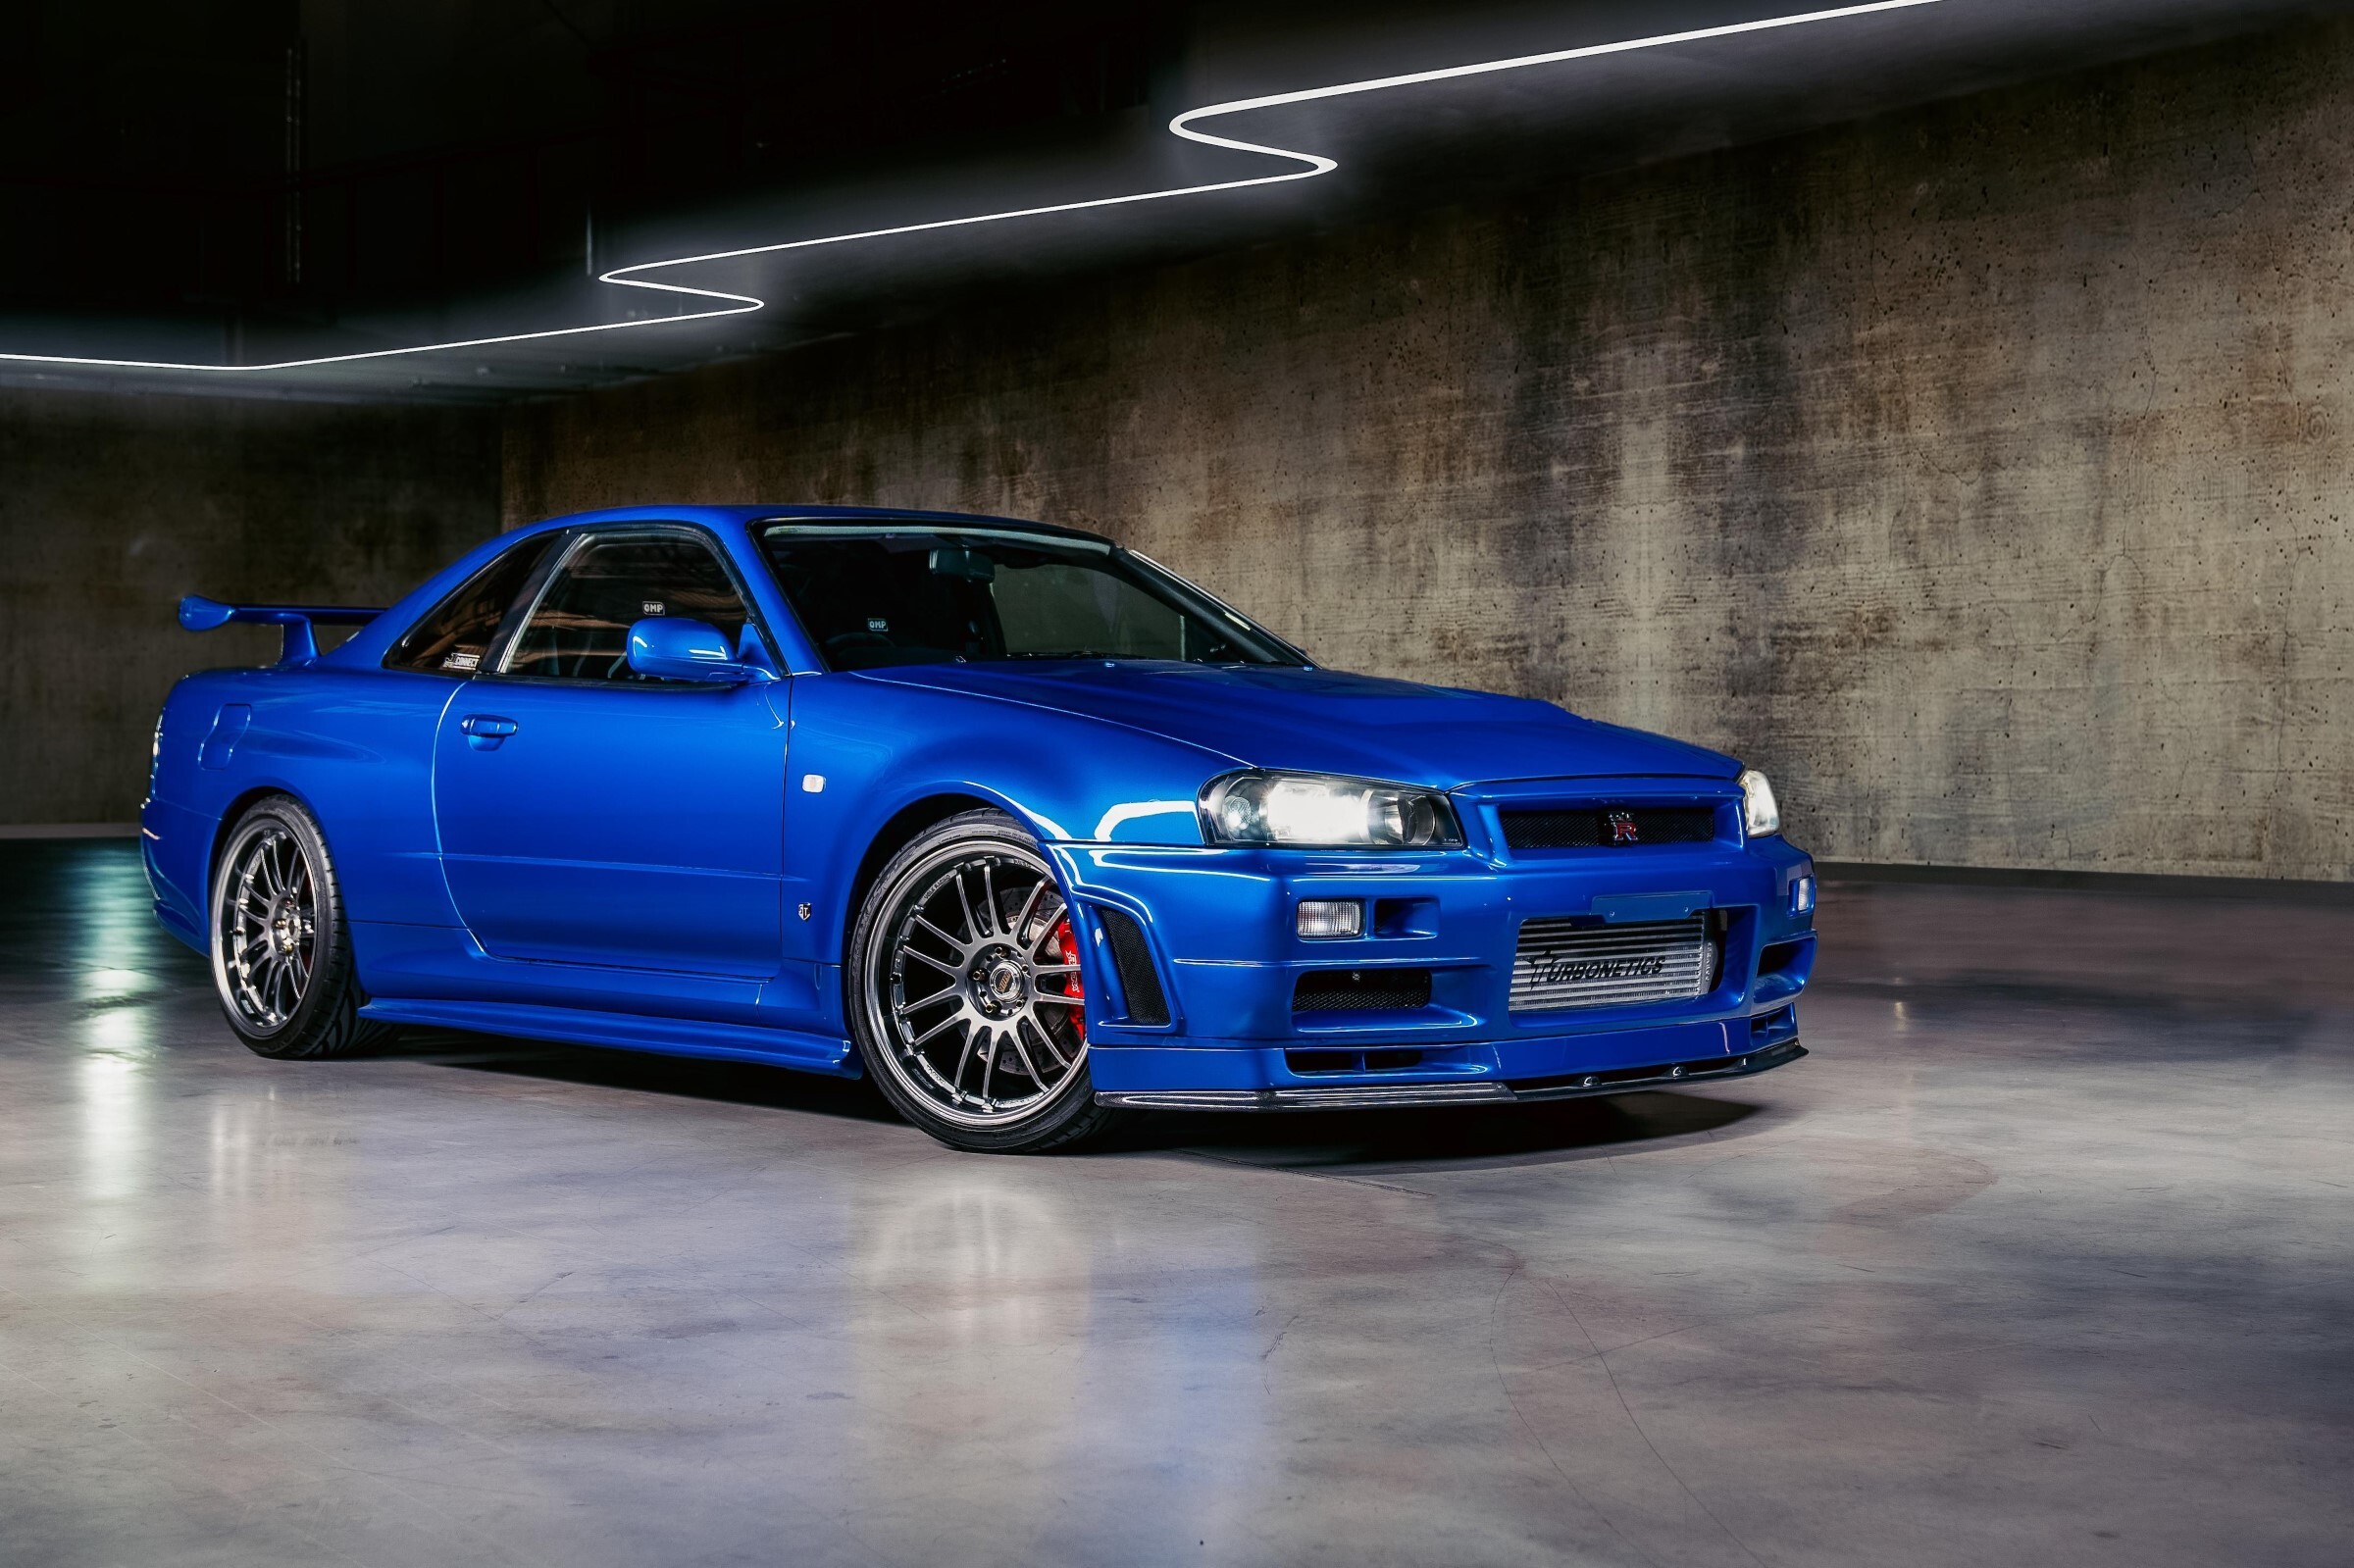 The sky's the limit for this Paul Walker-driven Skyline GT-R 